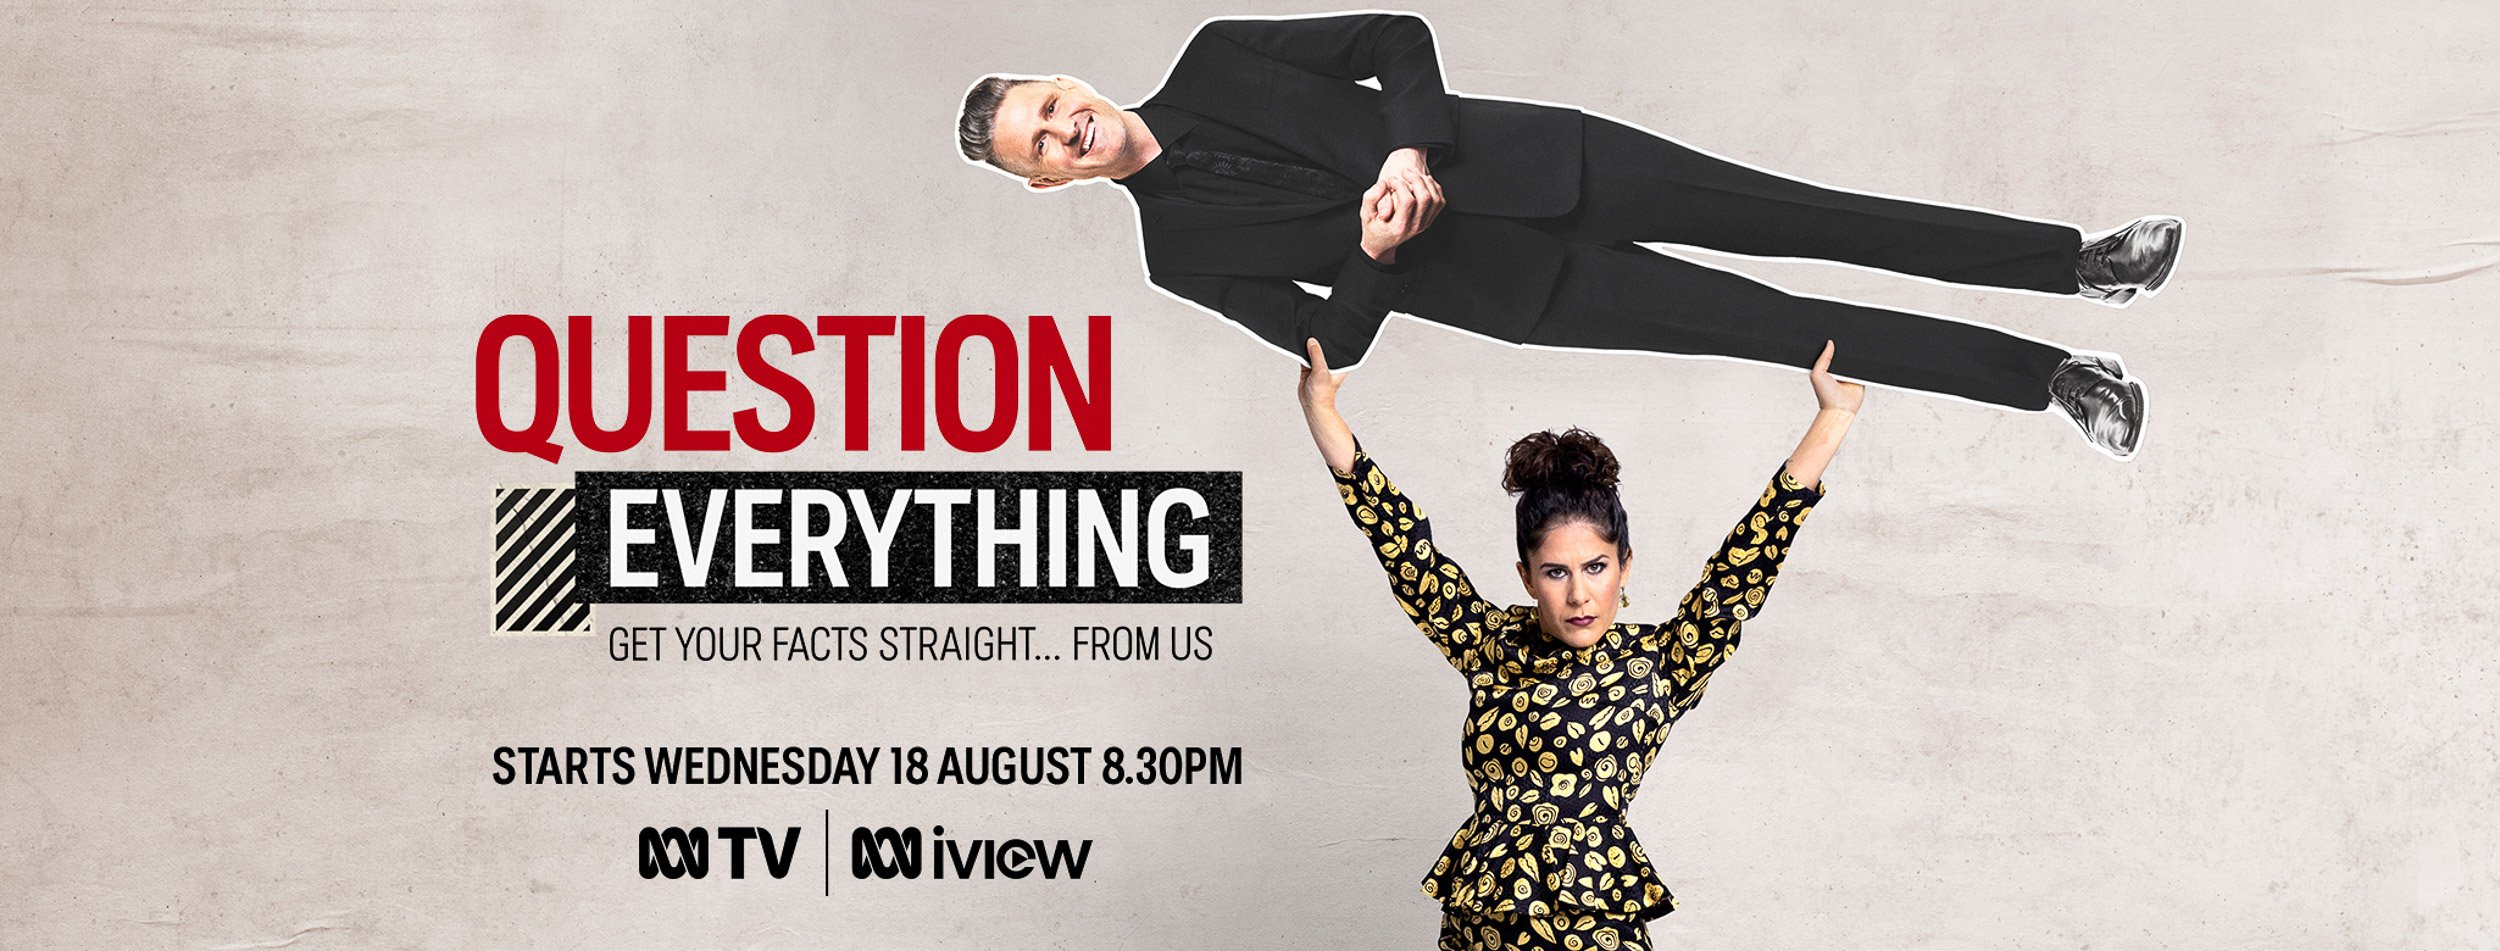 Question Everything ad campaign for ABC TV